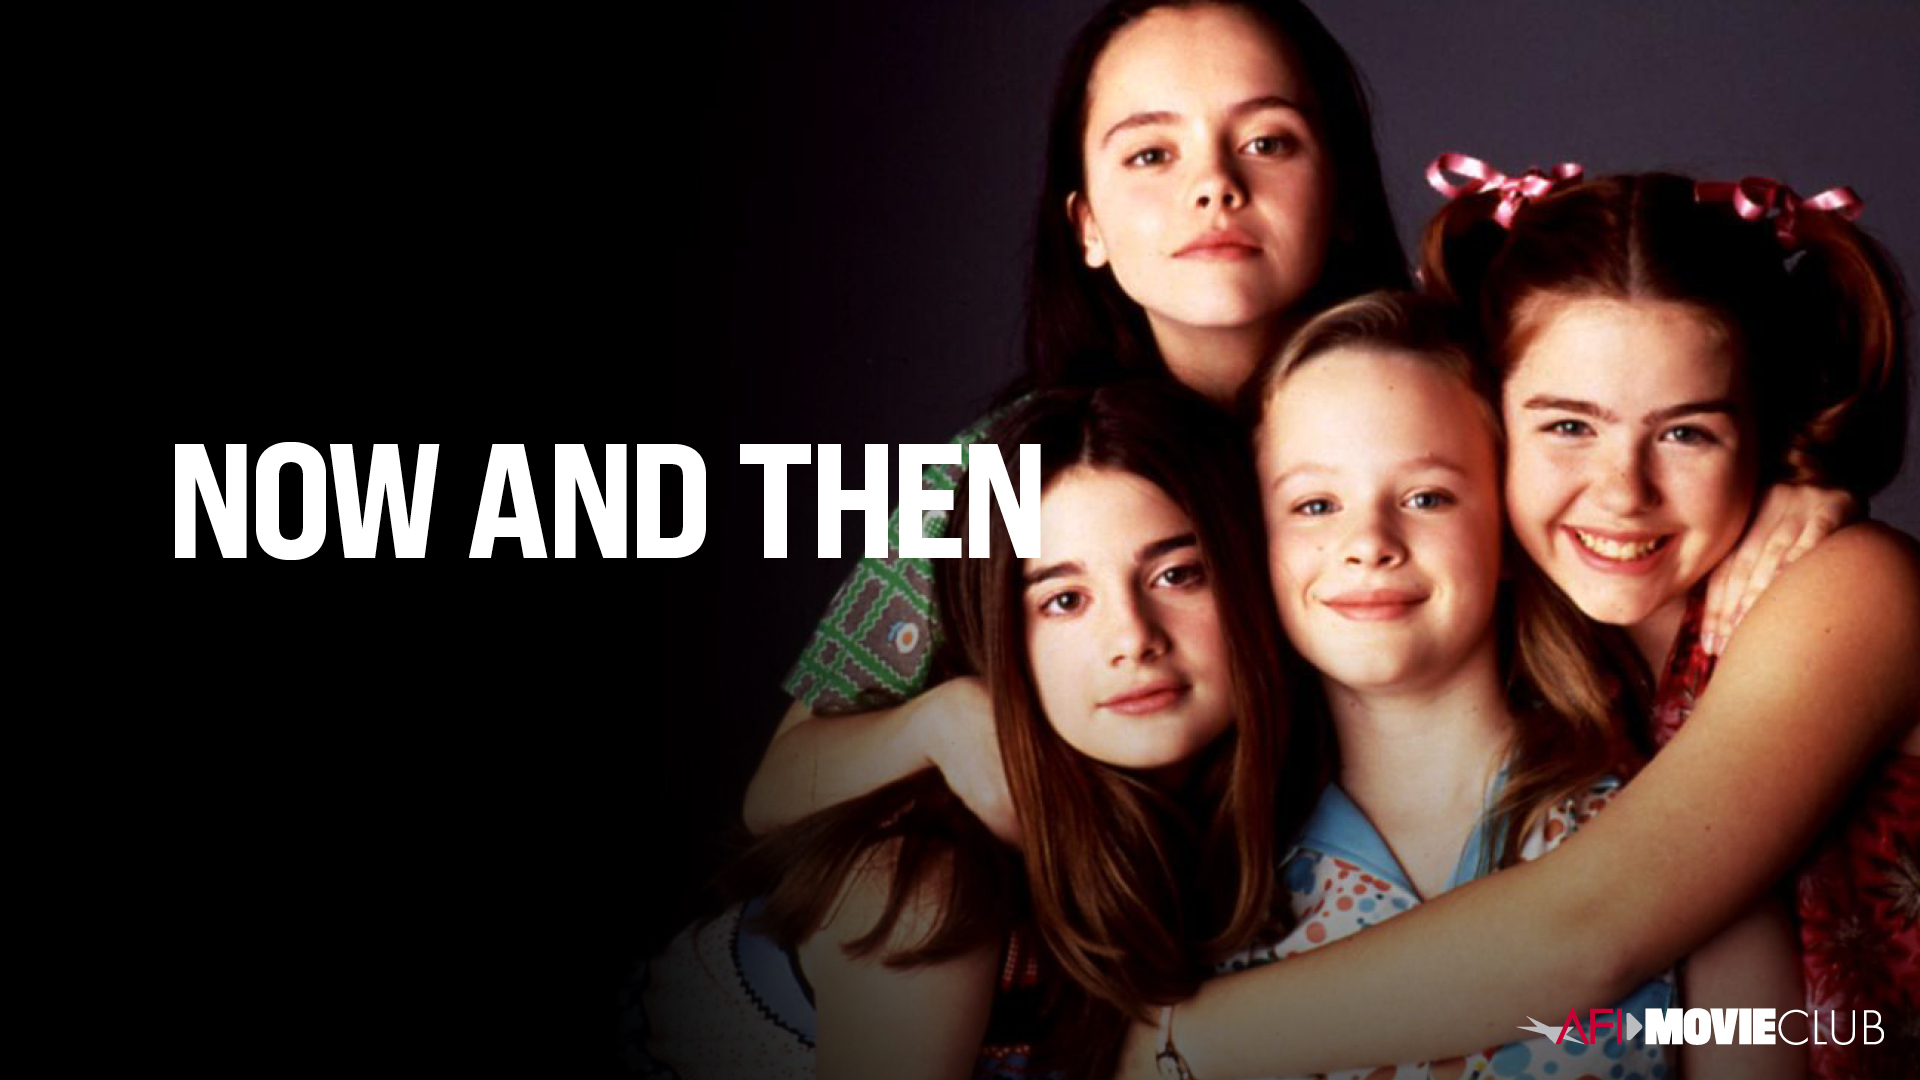 Now And Then Film Still - Christina Ricci, Thora Birch, Gaby Hoffmann, and Ashleigh Aston Moore